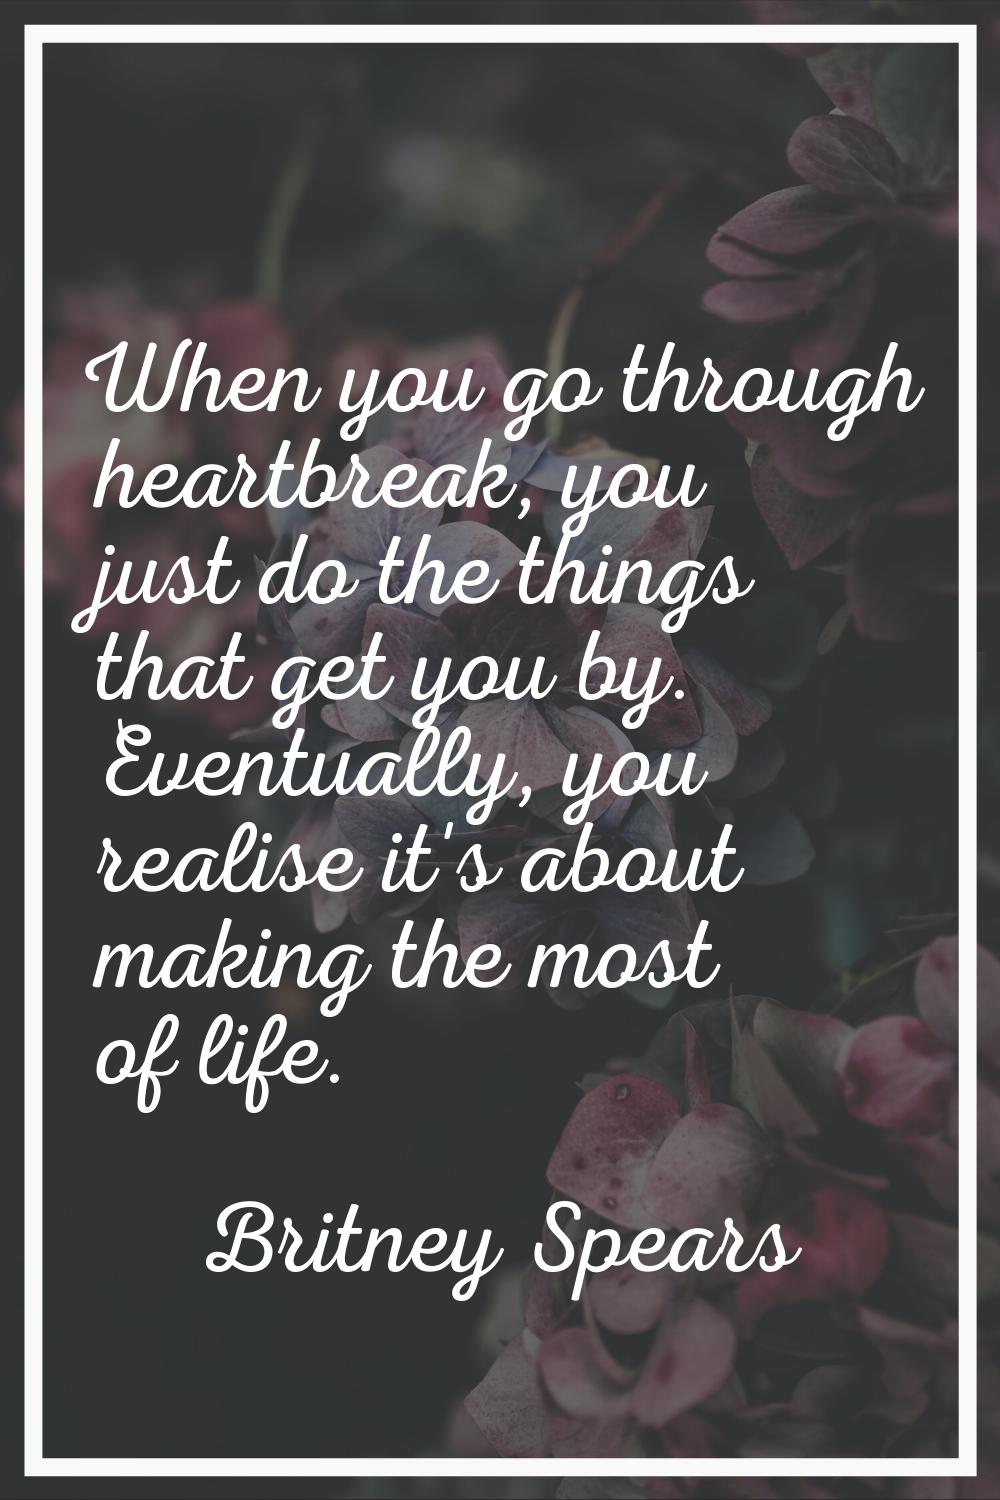 When you go through heartbreak, you just do the things that get you by. Eventually, you realise it'